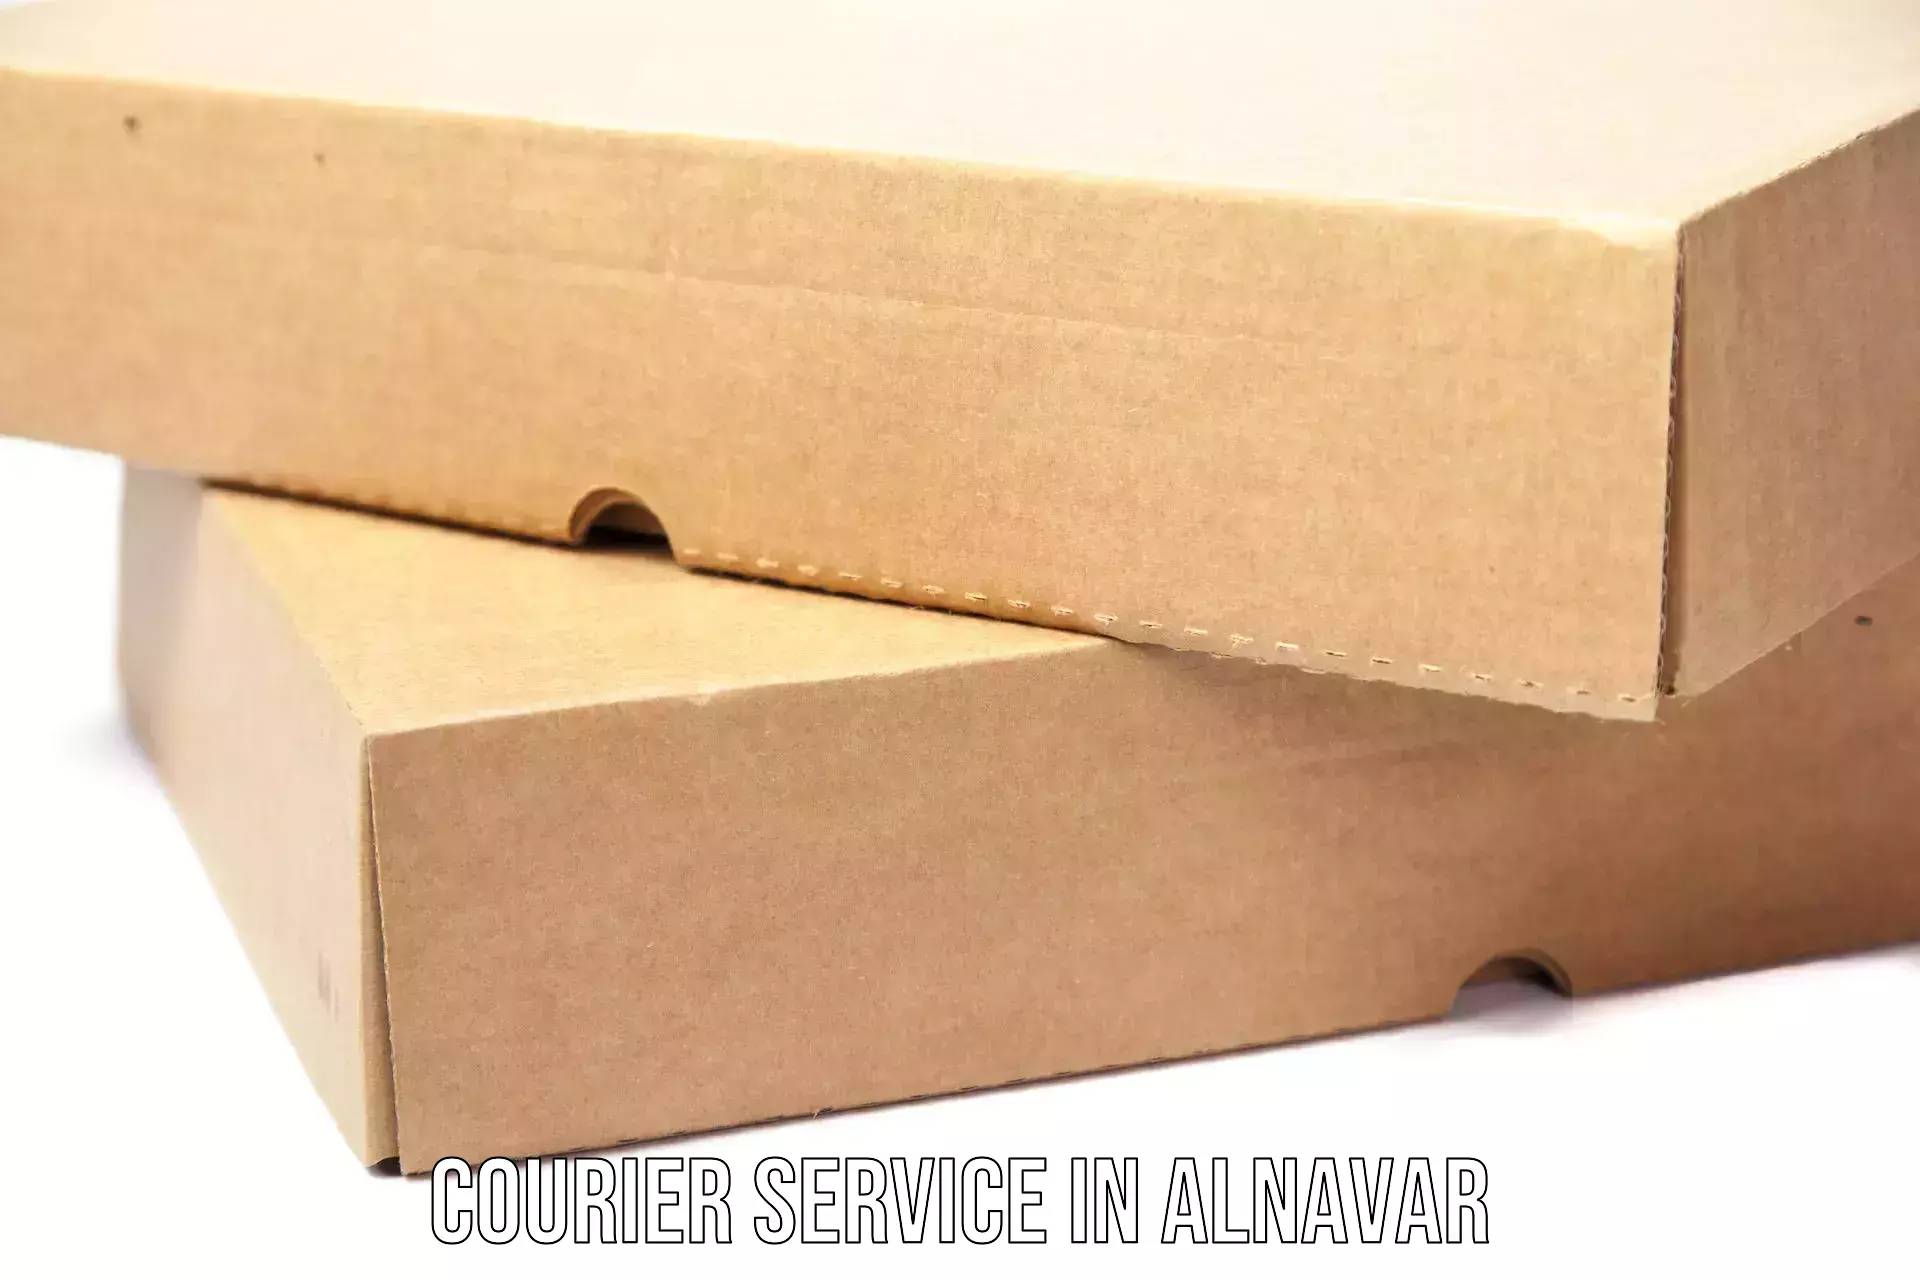 On-call courier service in Alnavar